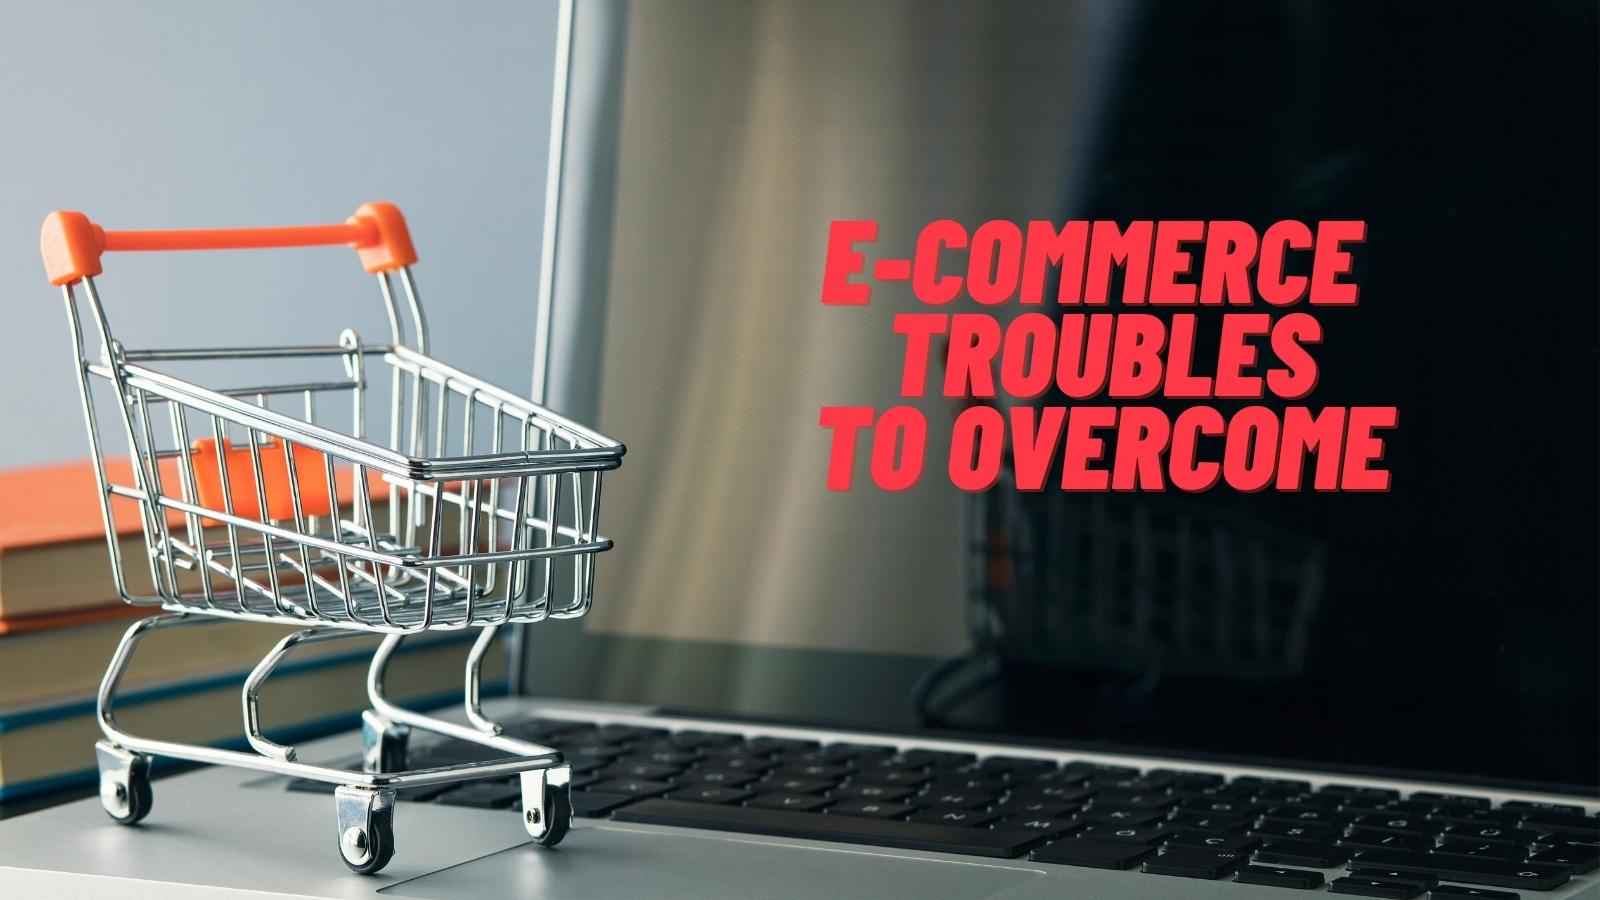 troubles of an e-commerce company